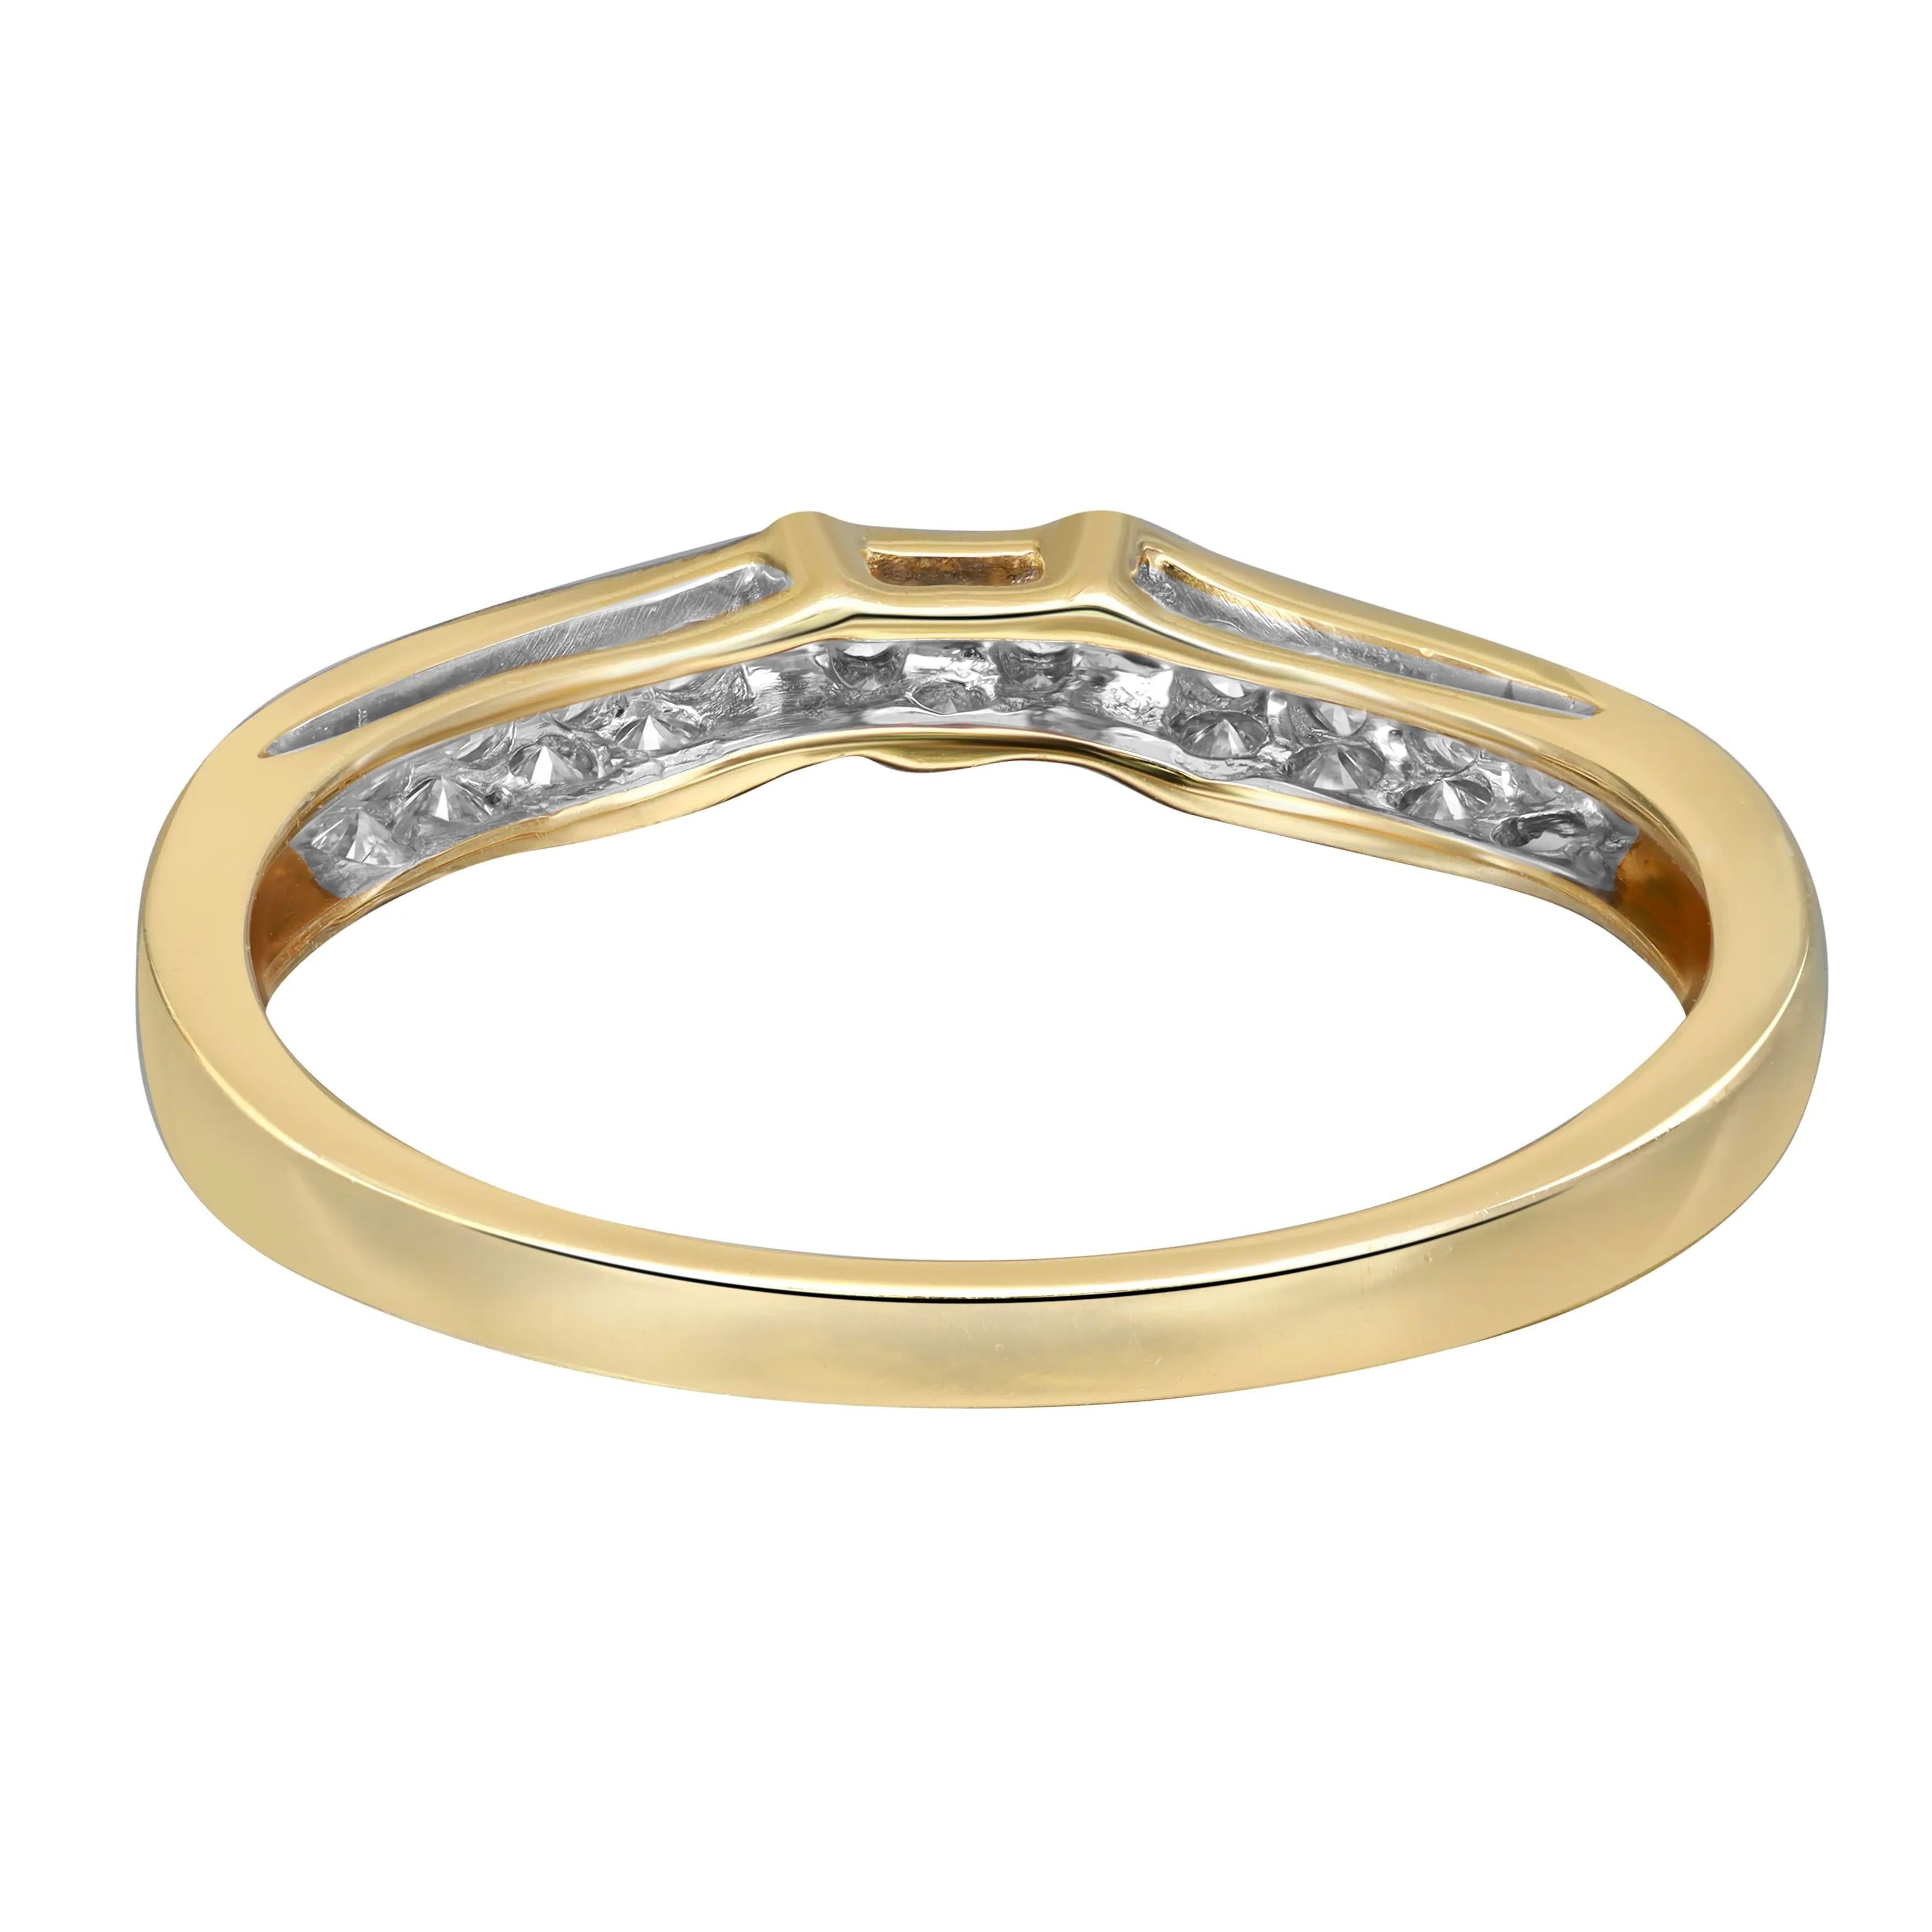 This beautiful petite band ring features round brilliant cut diamonds in pave setting. Crafted in high polished 14K yellow gold. Diamond color I and SI clarity. Total diamond weight: 0.37 carat. Ring size: 7.75. Band width: 2.6mm. Total weight: 1.87